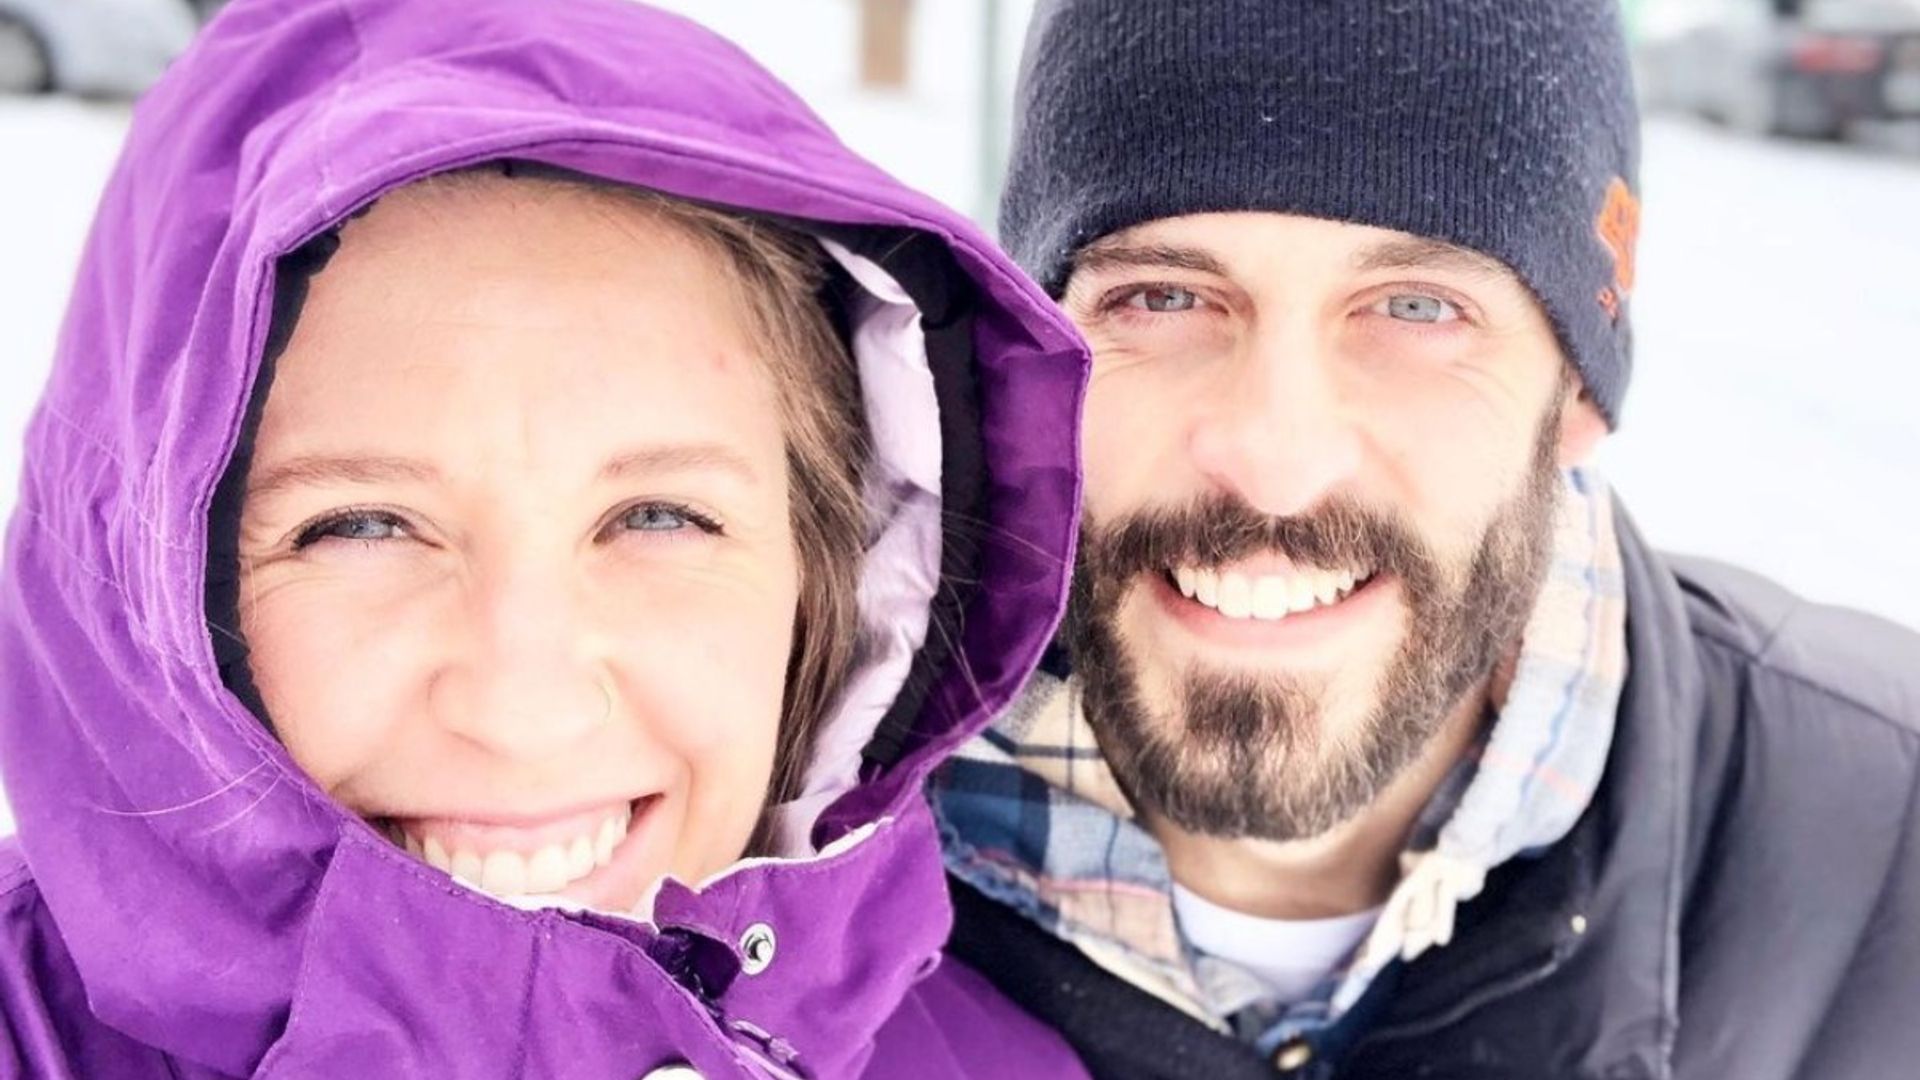 Jill Duggar marks special celebration with husband in adorable family photo